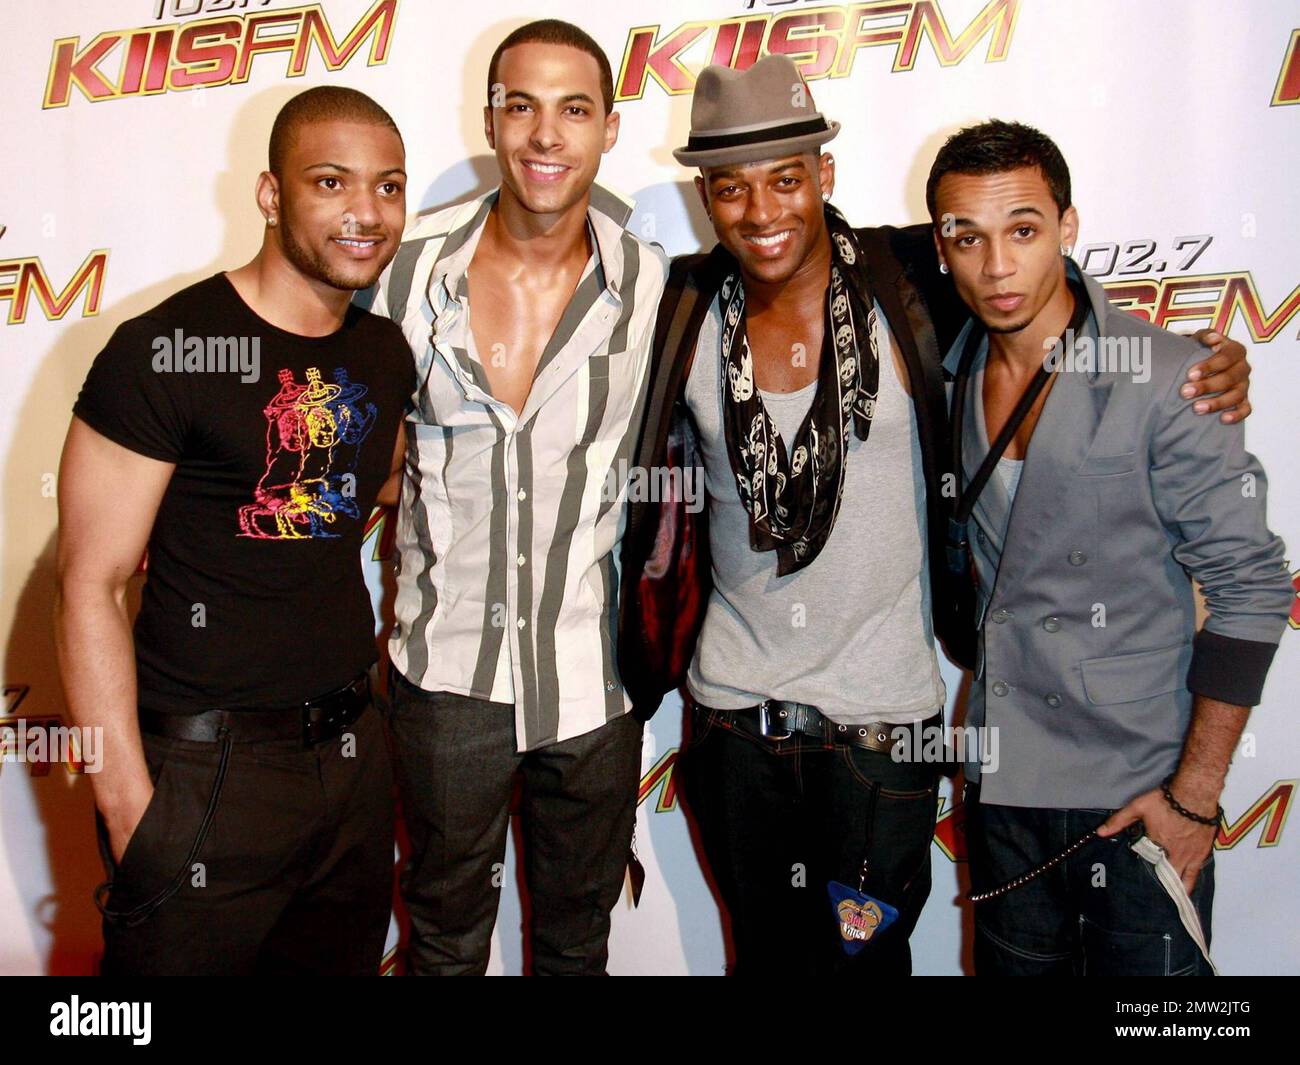 Brit boyband JLS (Jack the Lad Swing) Aston Merrygold, Marvin Humes, Jonathan 'JB' Gill and Oritse Williams walk the red carpet at the KIIS FM Wango Tango 2010 Music Festival at the Staples Center. Los Angeles, CA. 05/15/10.   . Stock Photo